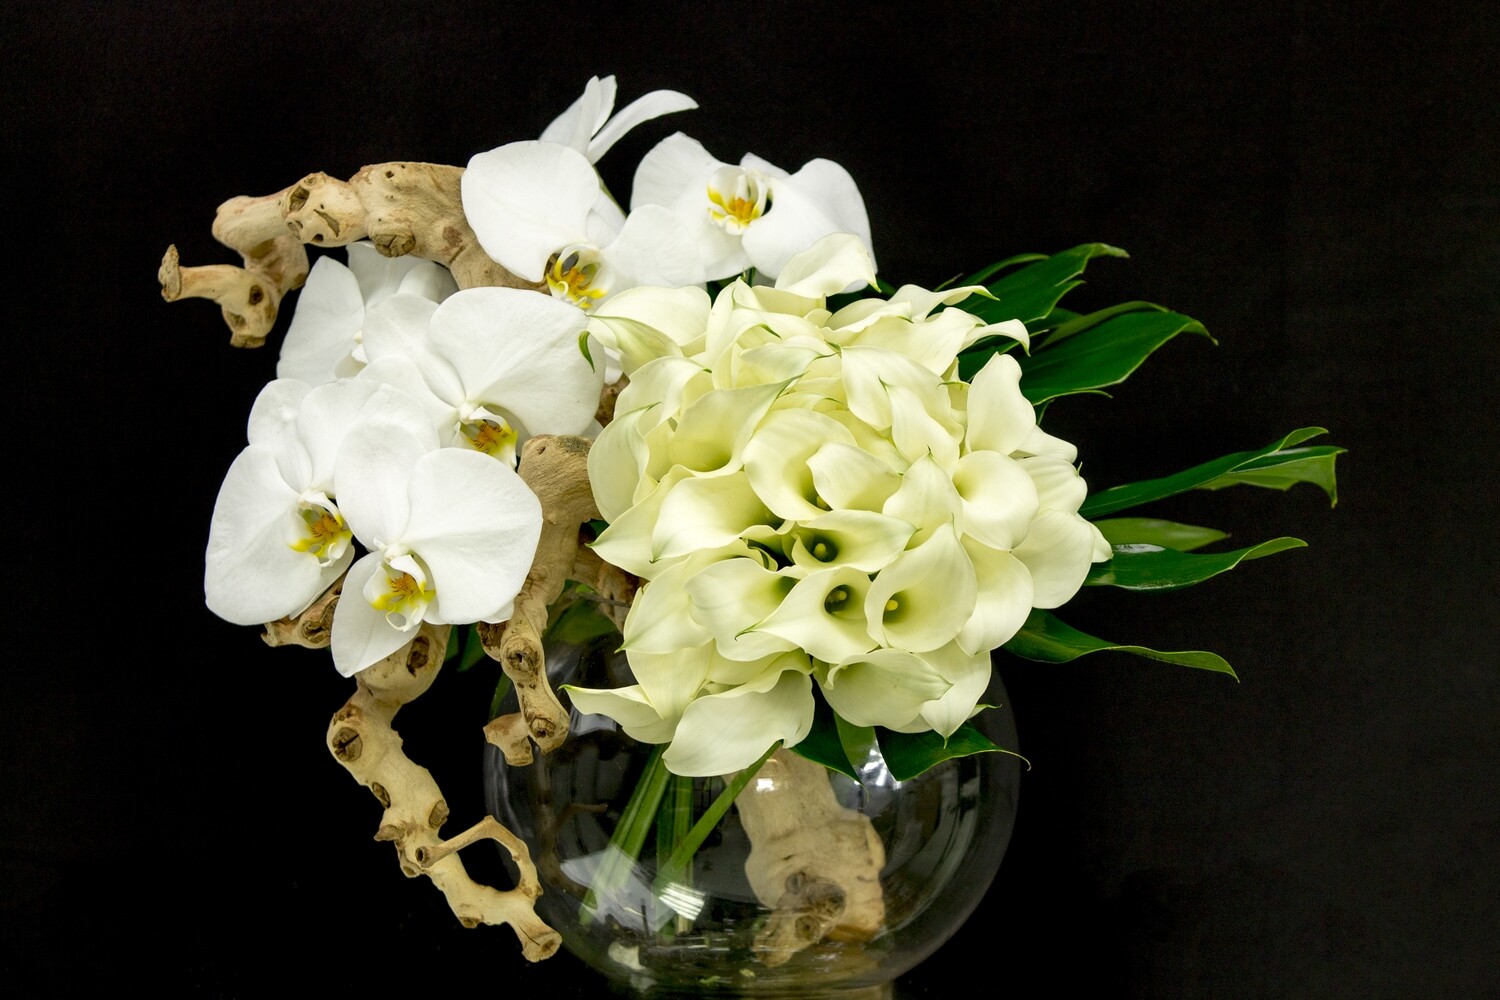 LUXURY FLOWER DESIGN WITH ORCHIDS AND CALLA LILIES